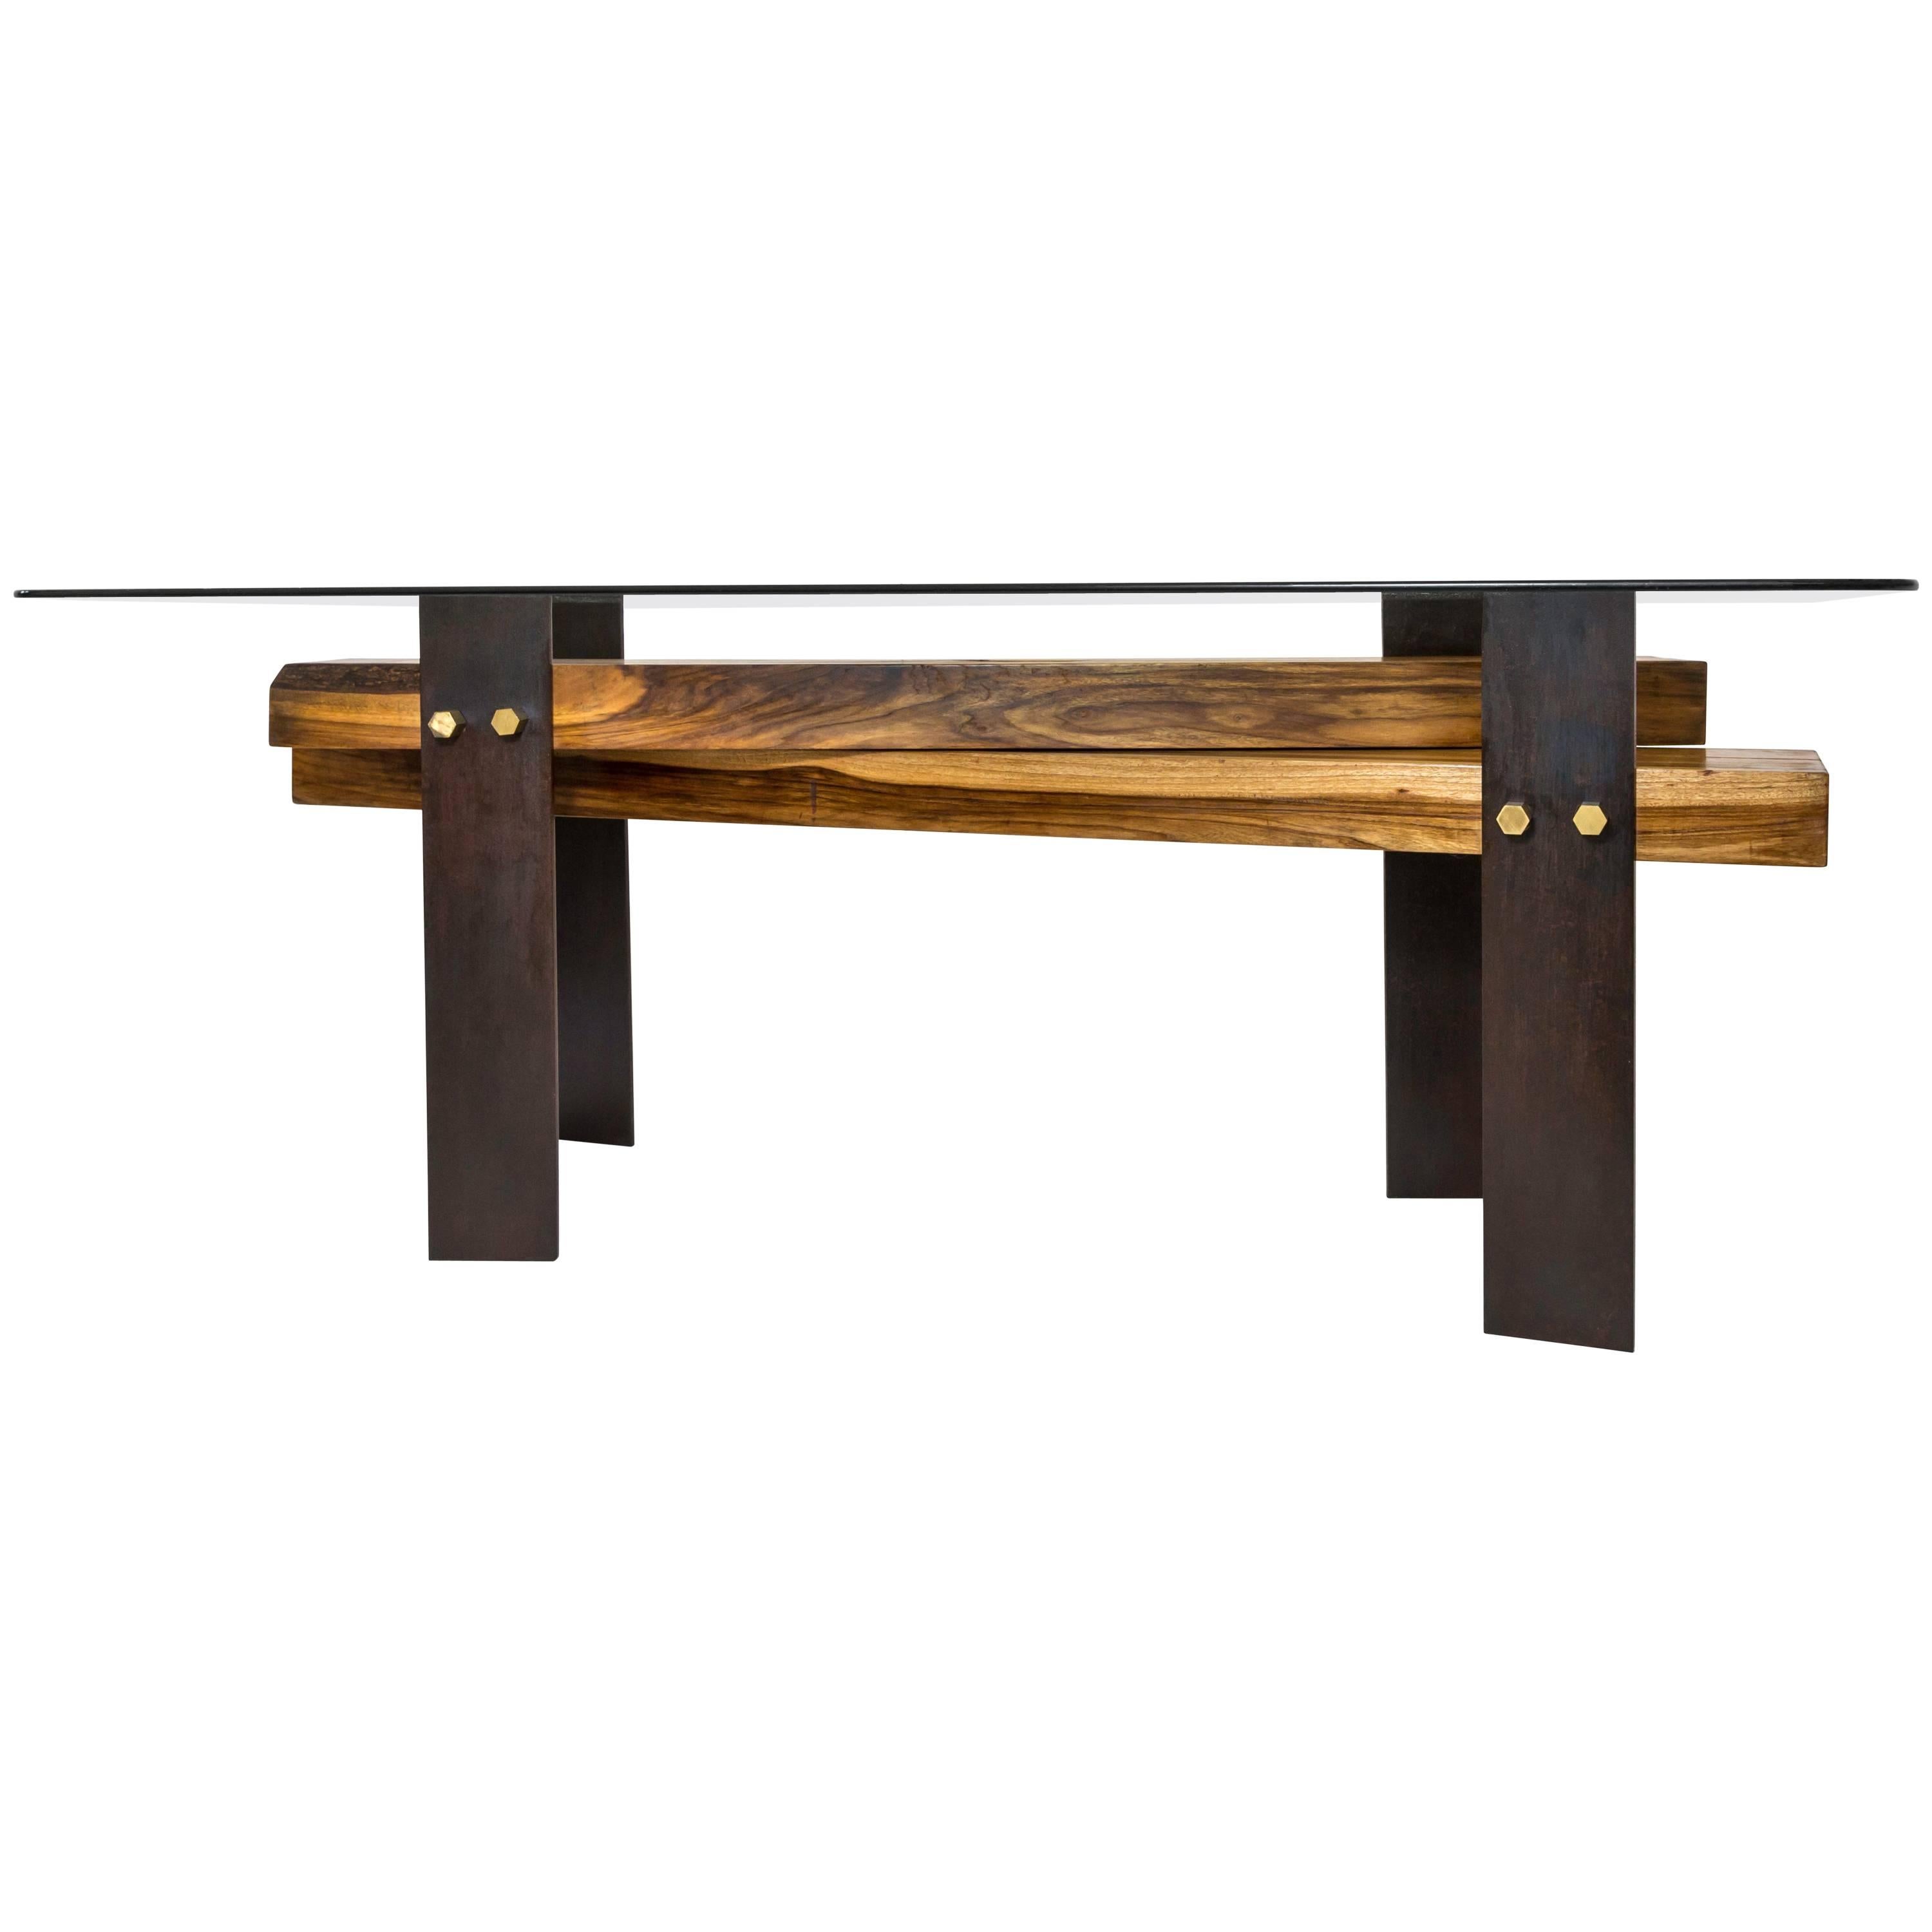 Customizable Cross Dining Table Capa Prieto Wood Black Steel and Brass Details For Sale